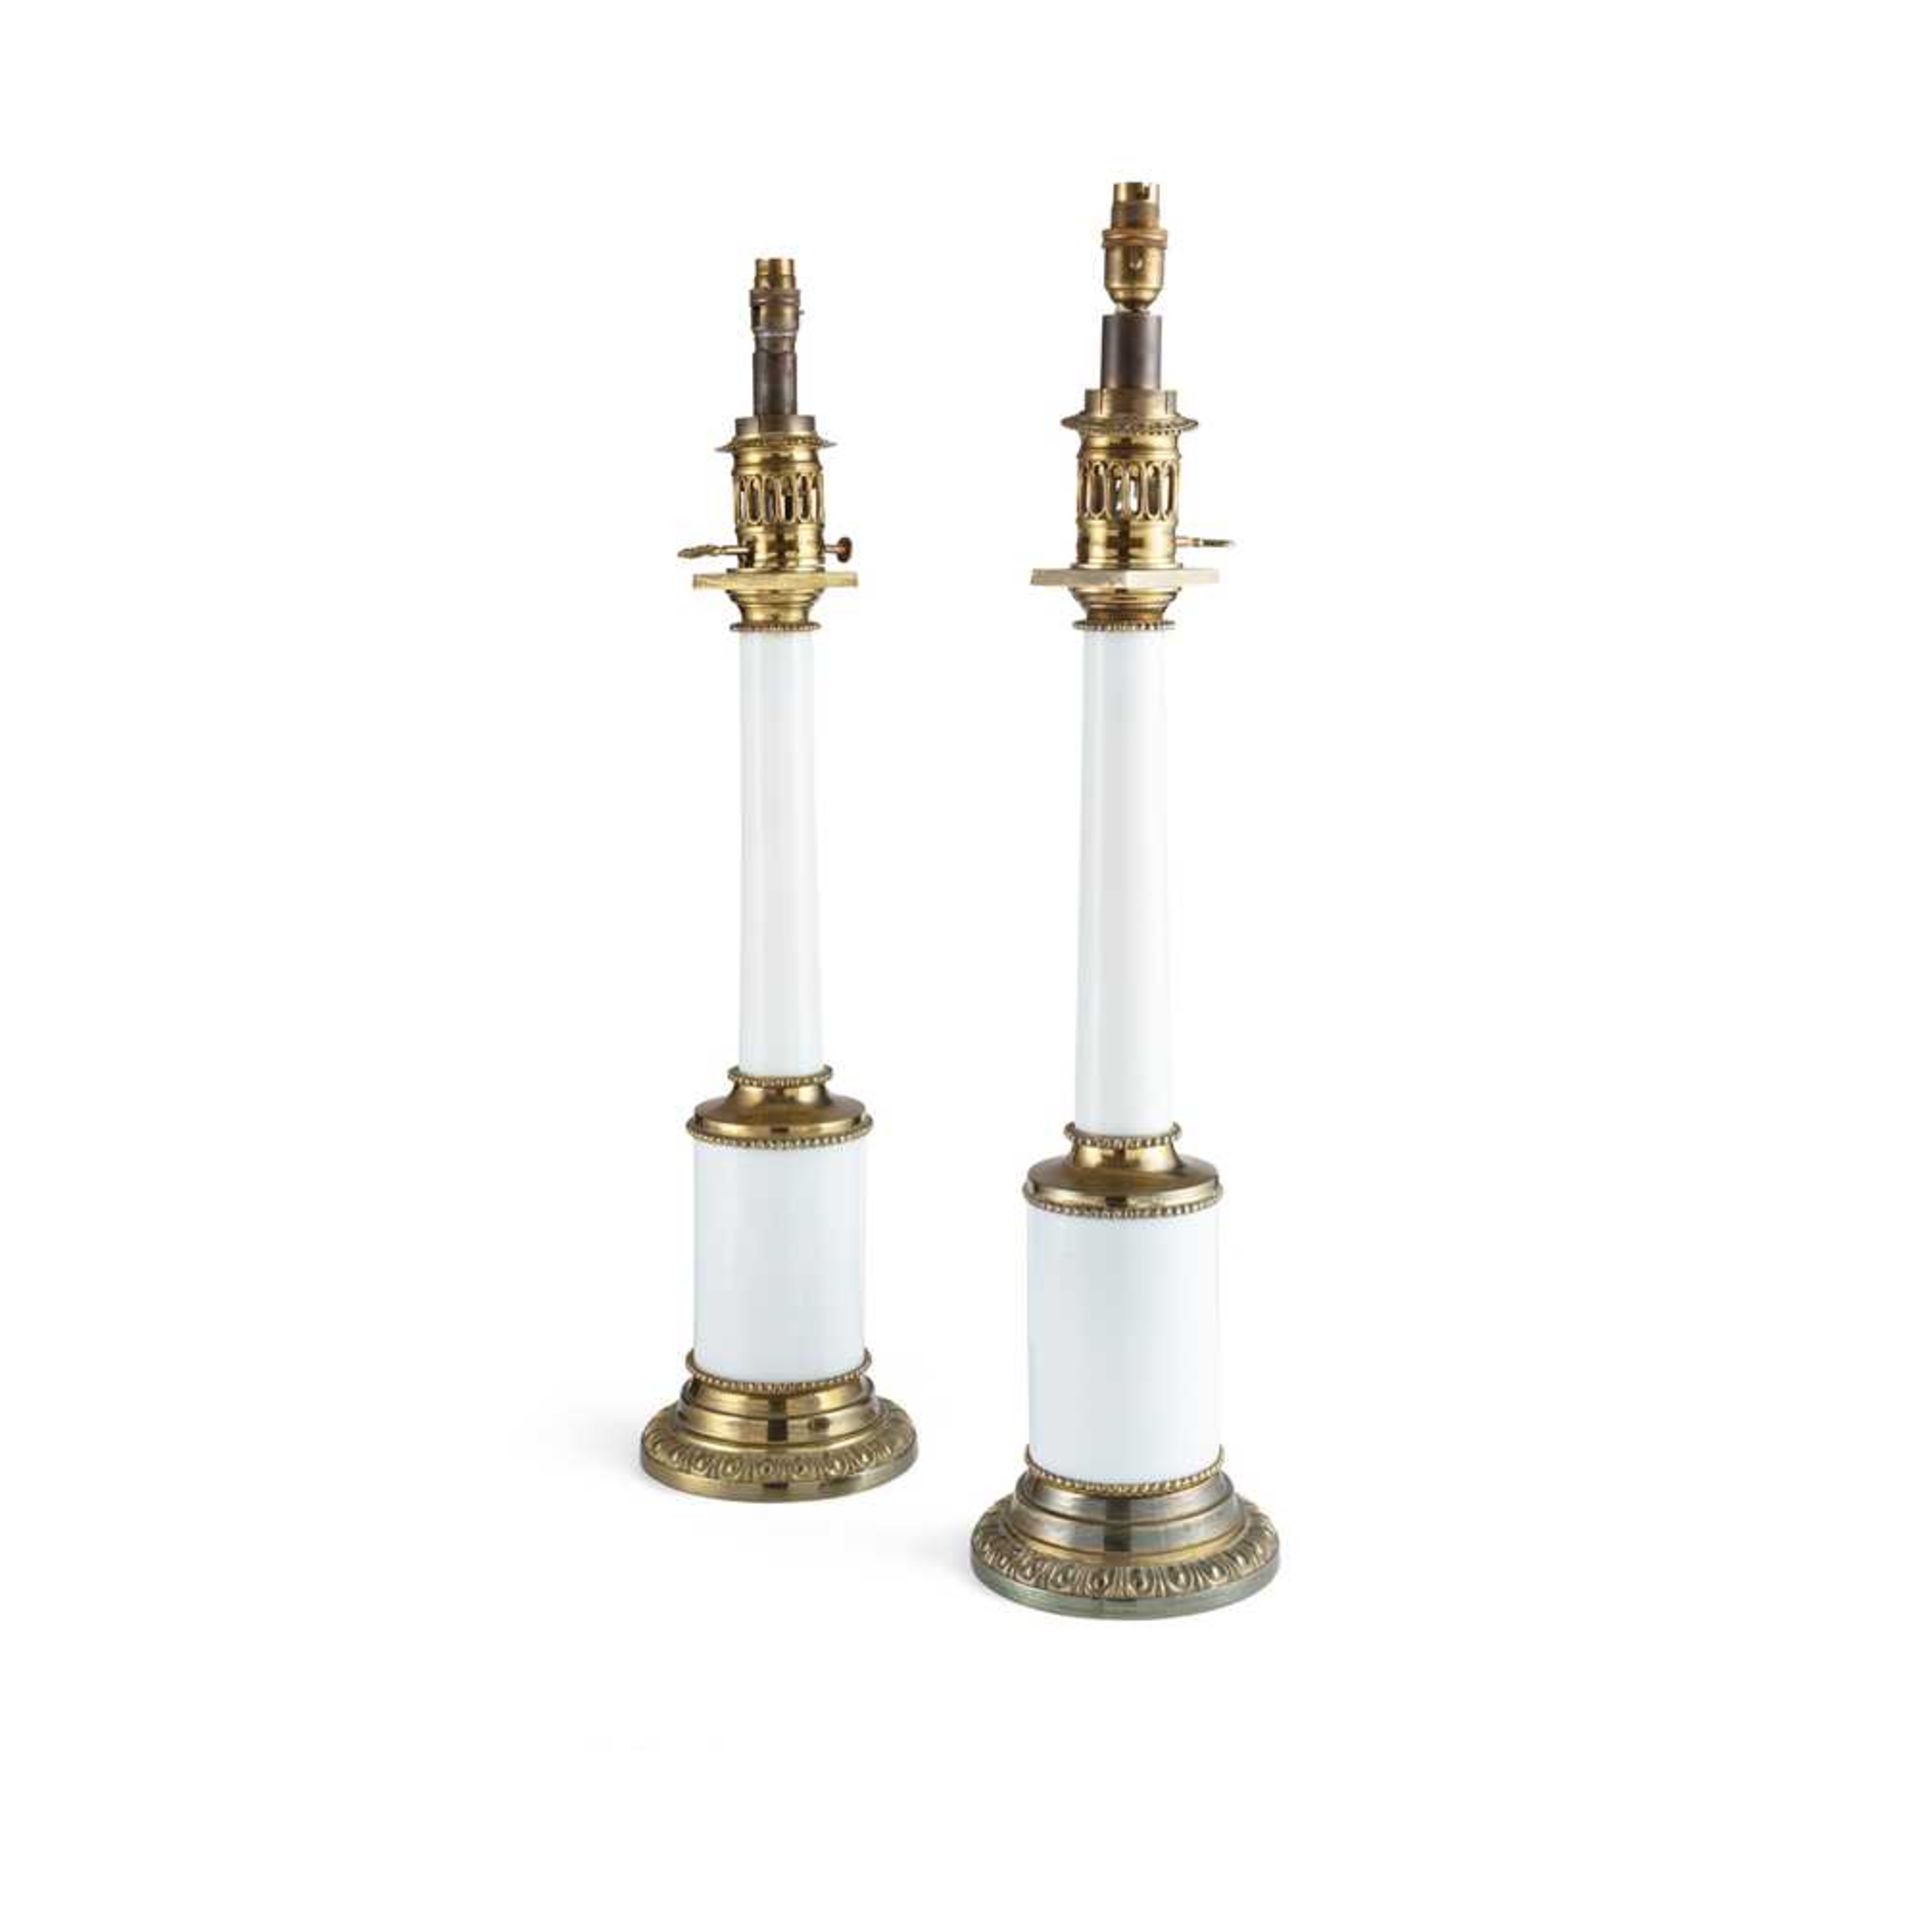 PAIR OF FRENCH OPALINE GLASS BRASS MOUNTED COLUMN LAMPS 19TH CENTURY - Image 2 of 13